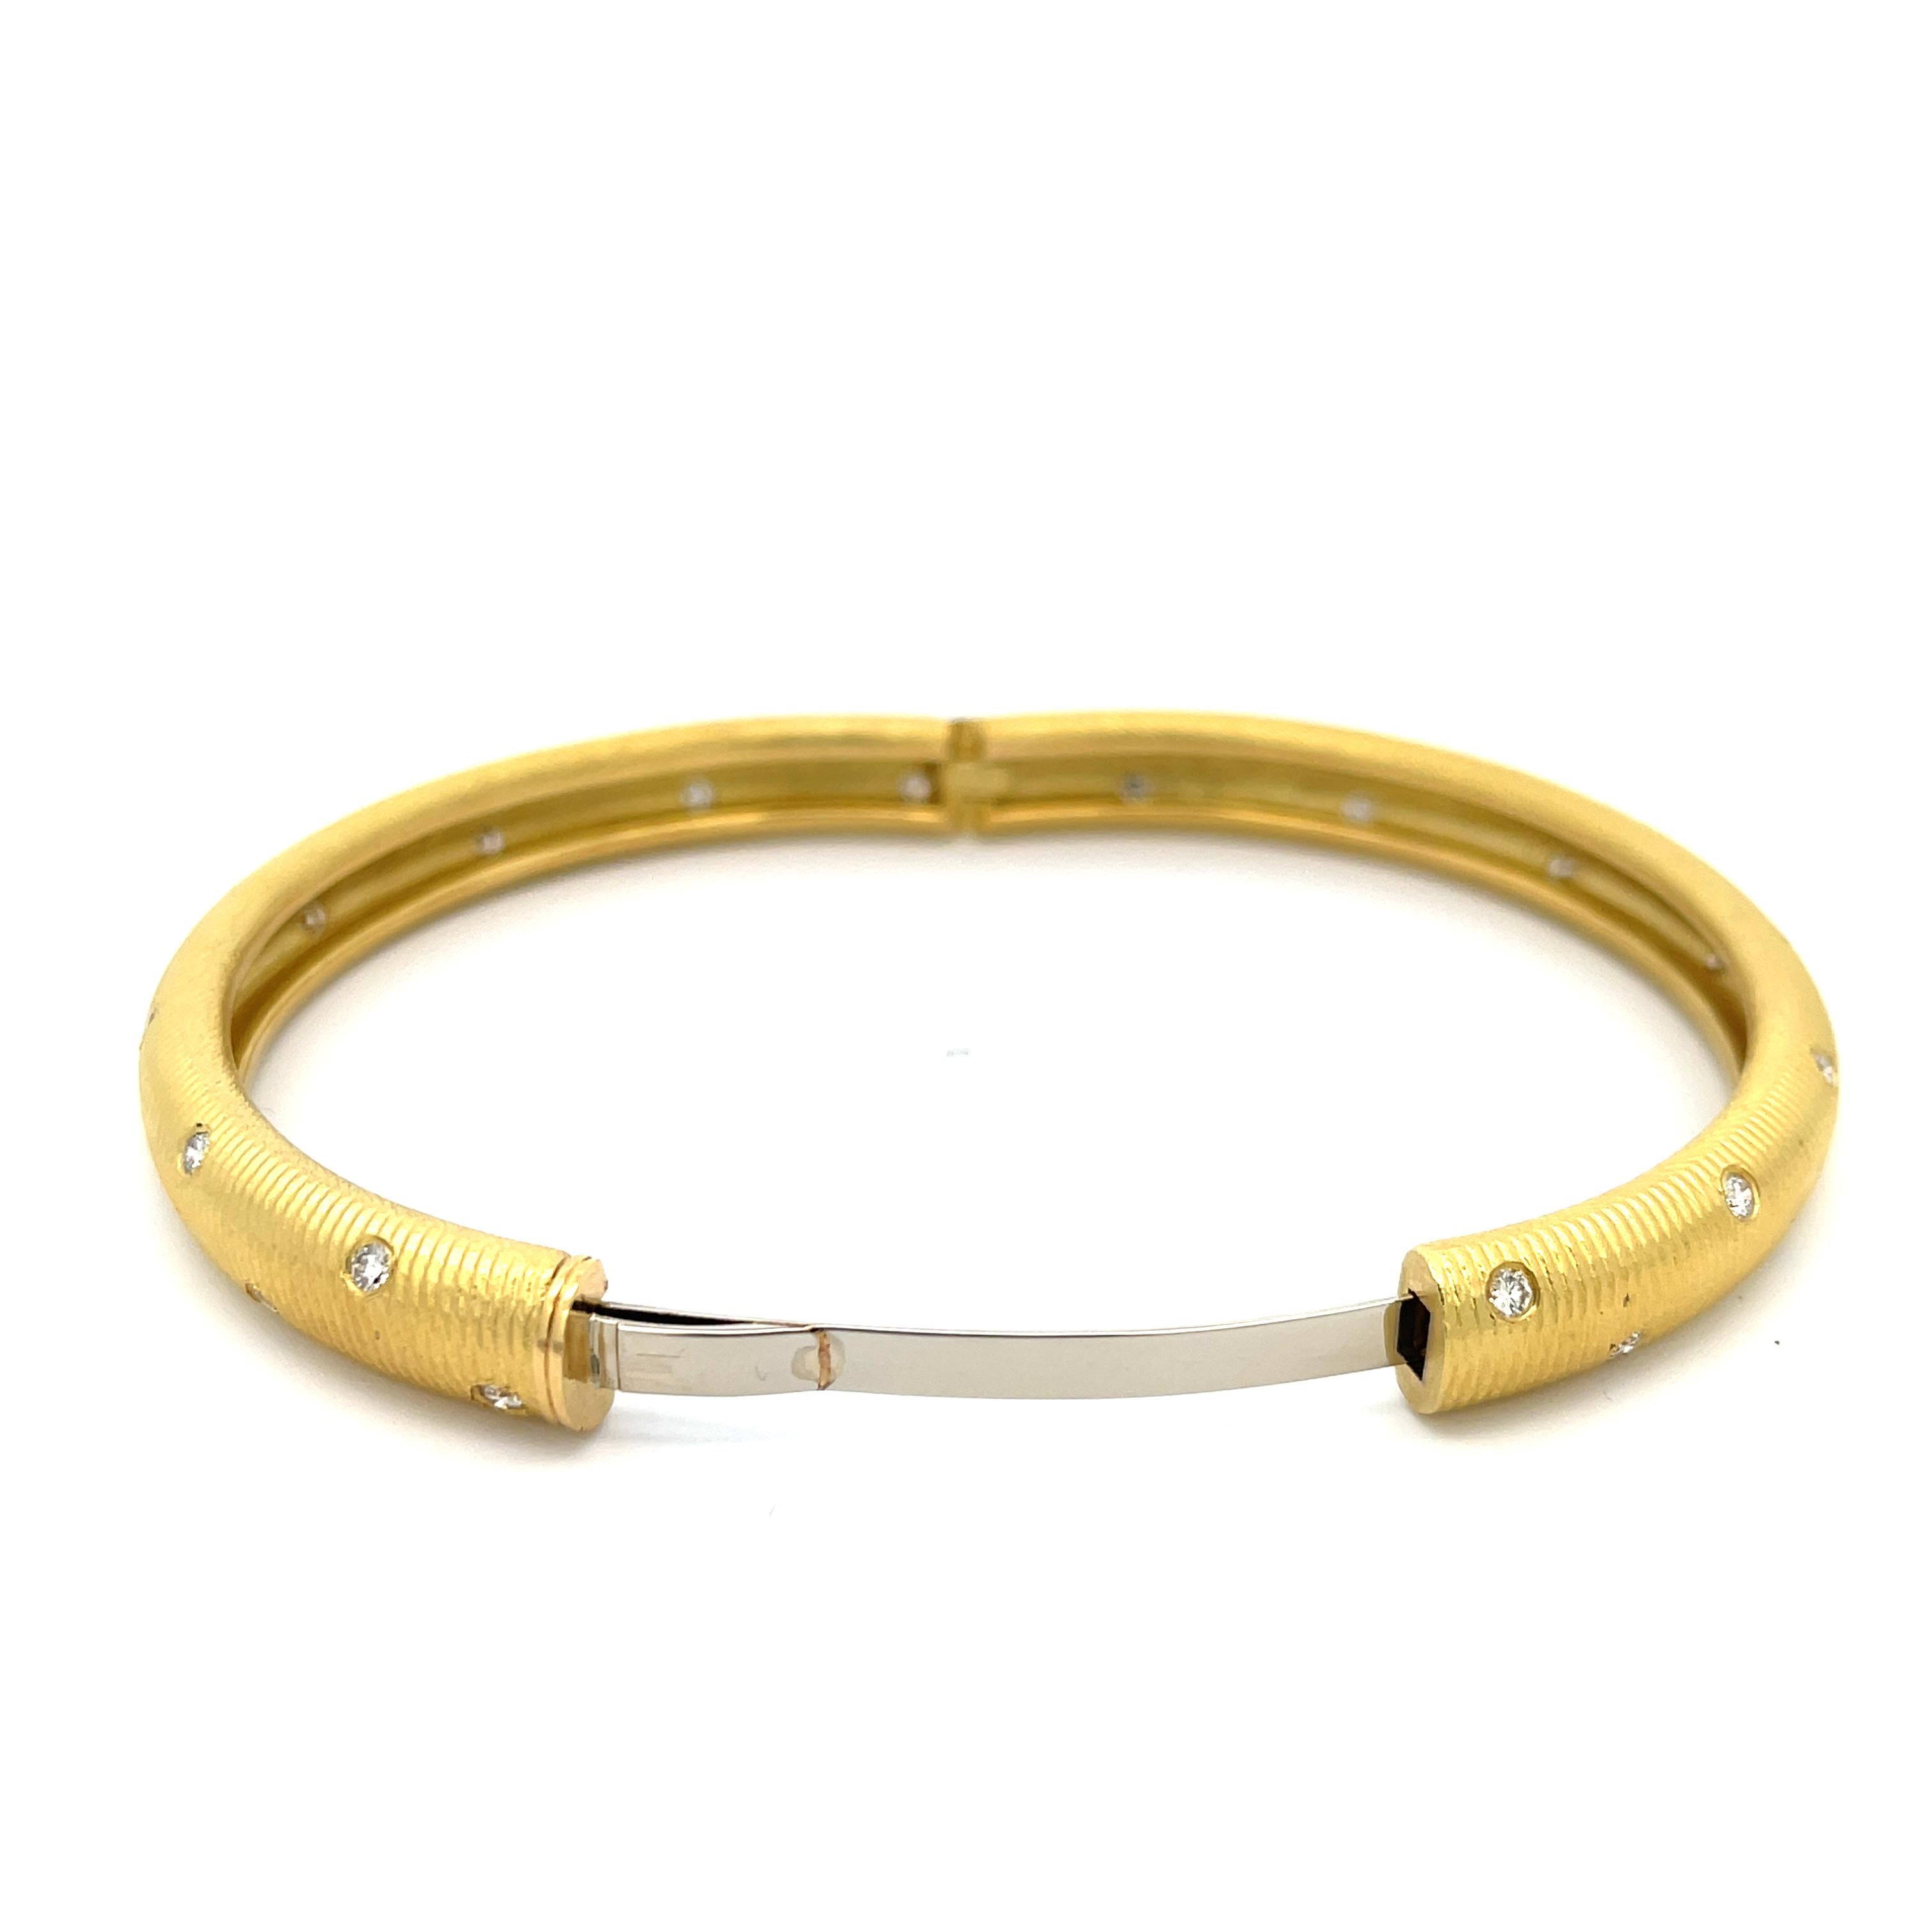 Paul Morelli Wide Ribbed Diamond Bangle in 18K Yellow Gold. The bangle features 30 brilliant round cut diamonds and weighs 34.28 grams
7